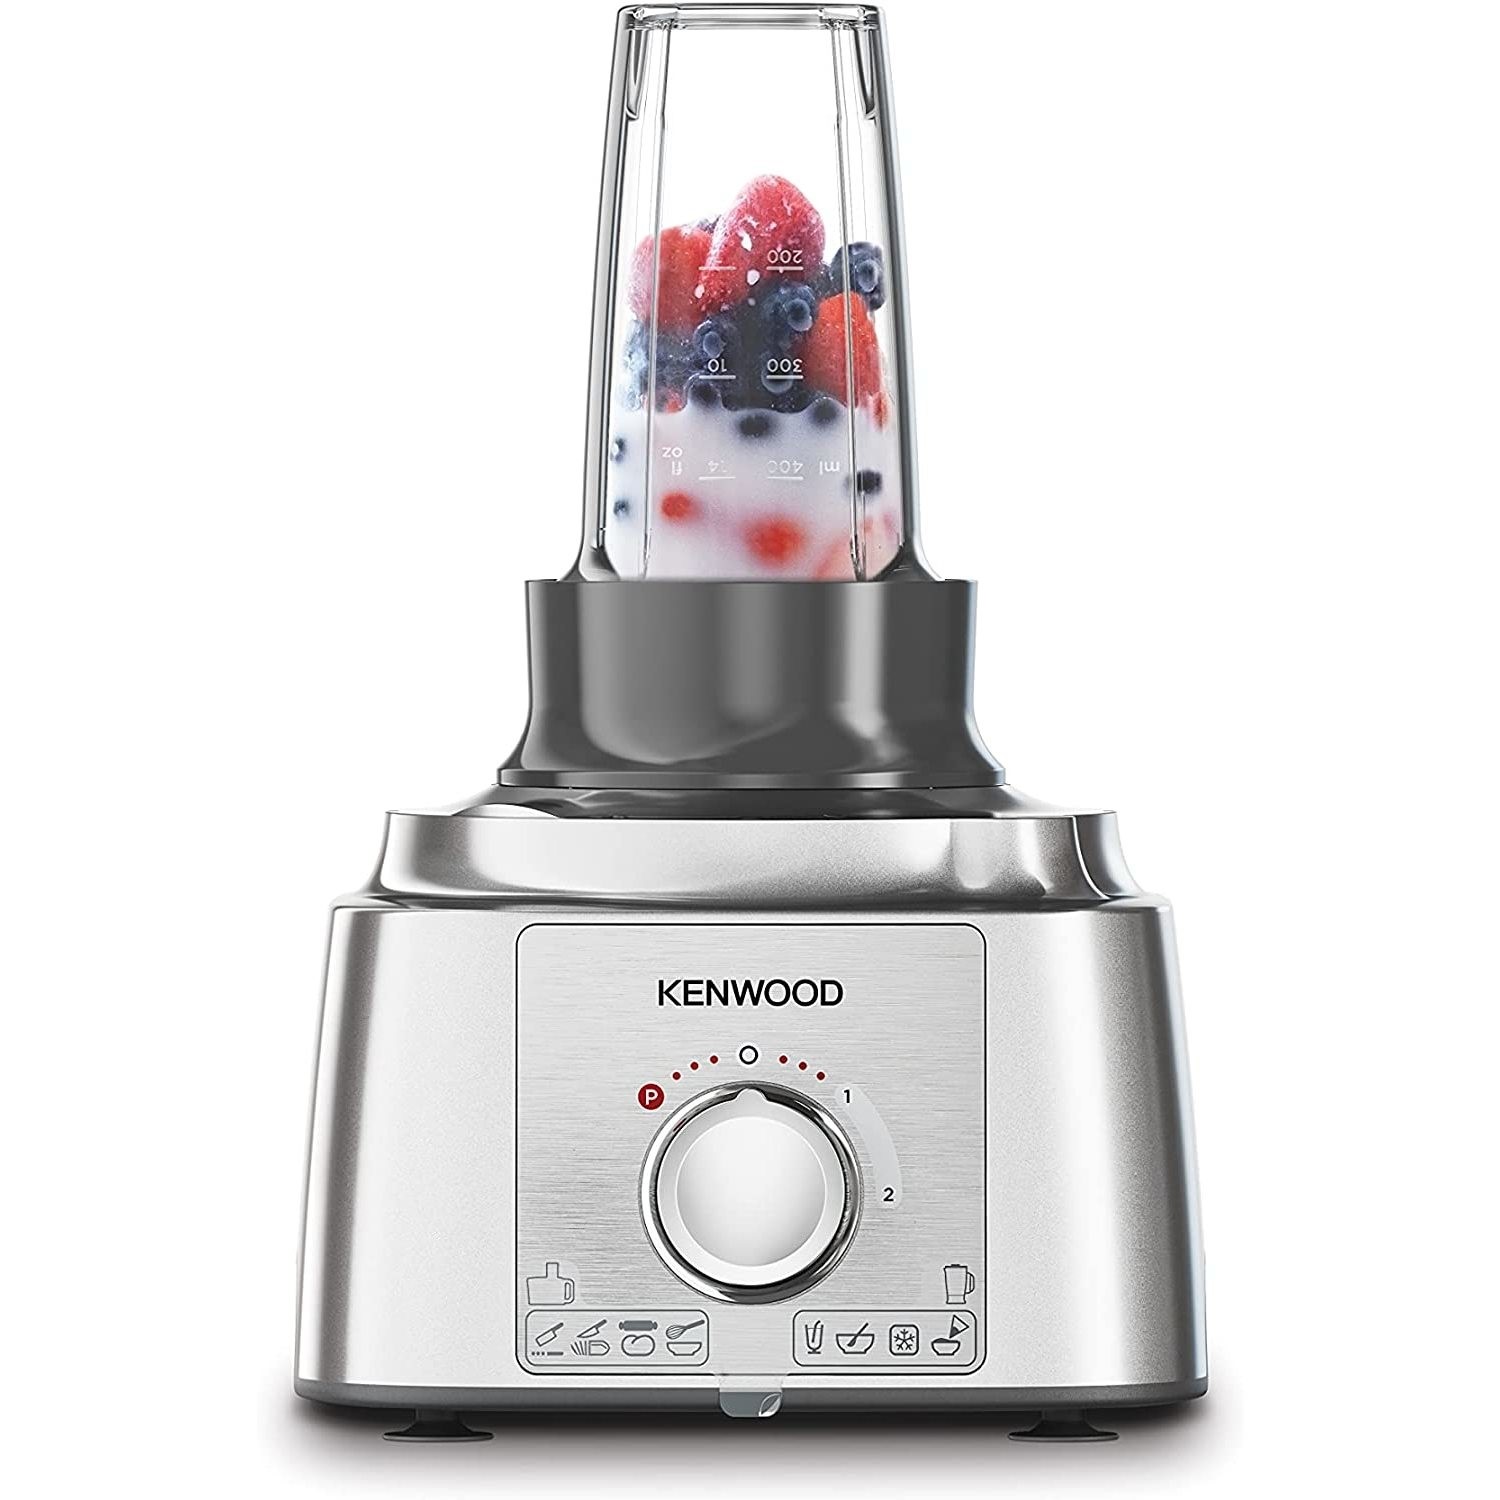 Kenwood Multipro Express 2-in-1 Food Processor - Silver FDP65.180SI Appliances Direct